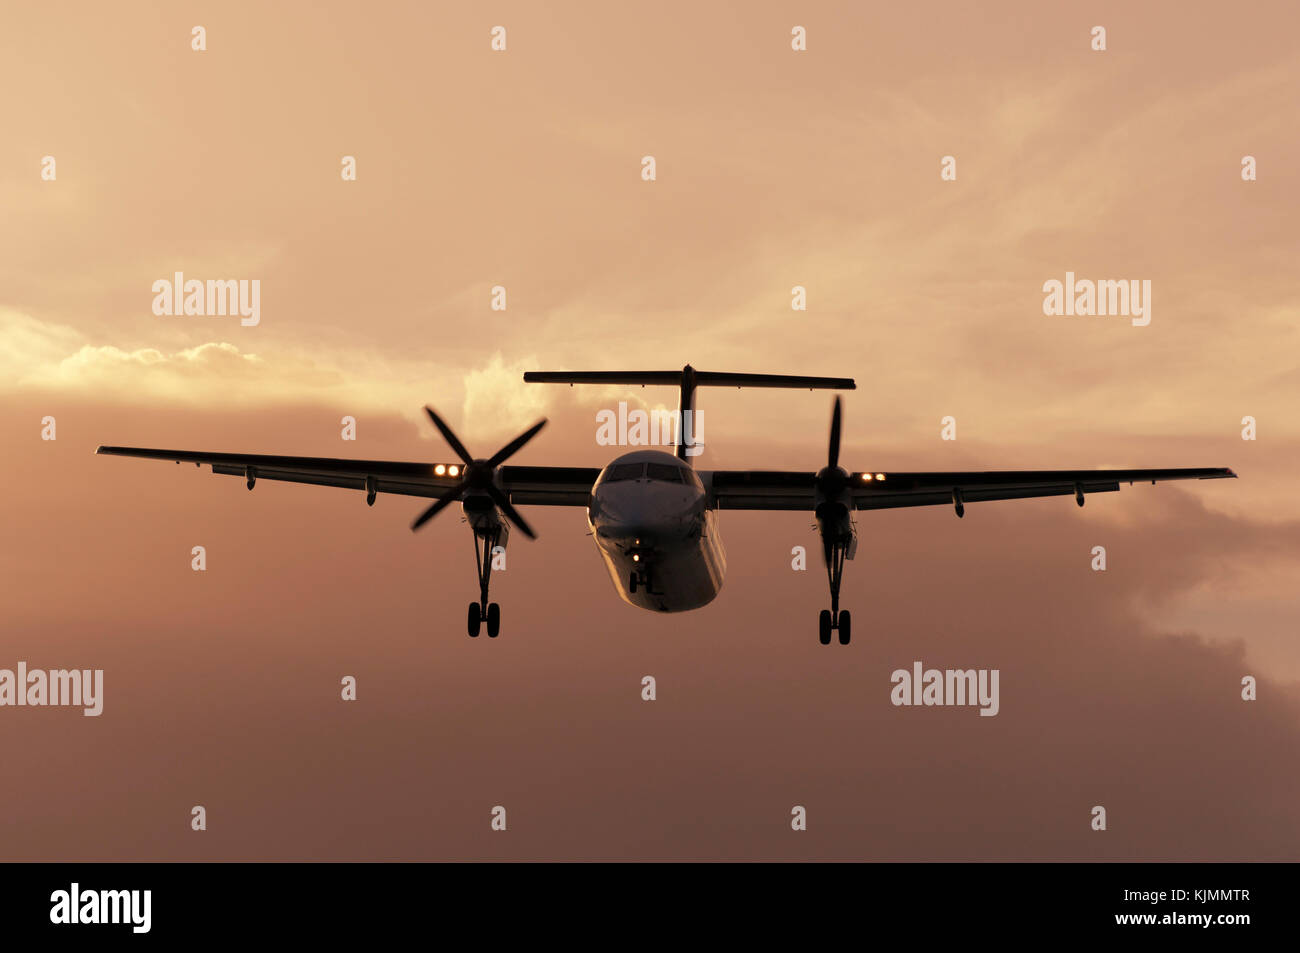 A Bombardier DHC-8 Dash 8 turboprop aircraft in the air. Stock Photo